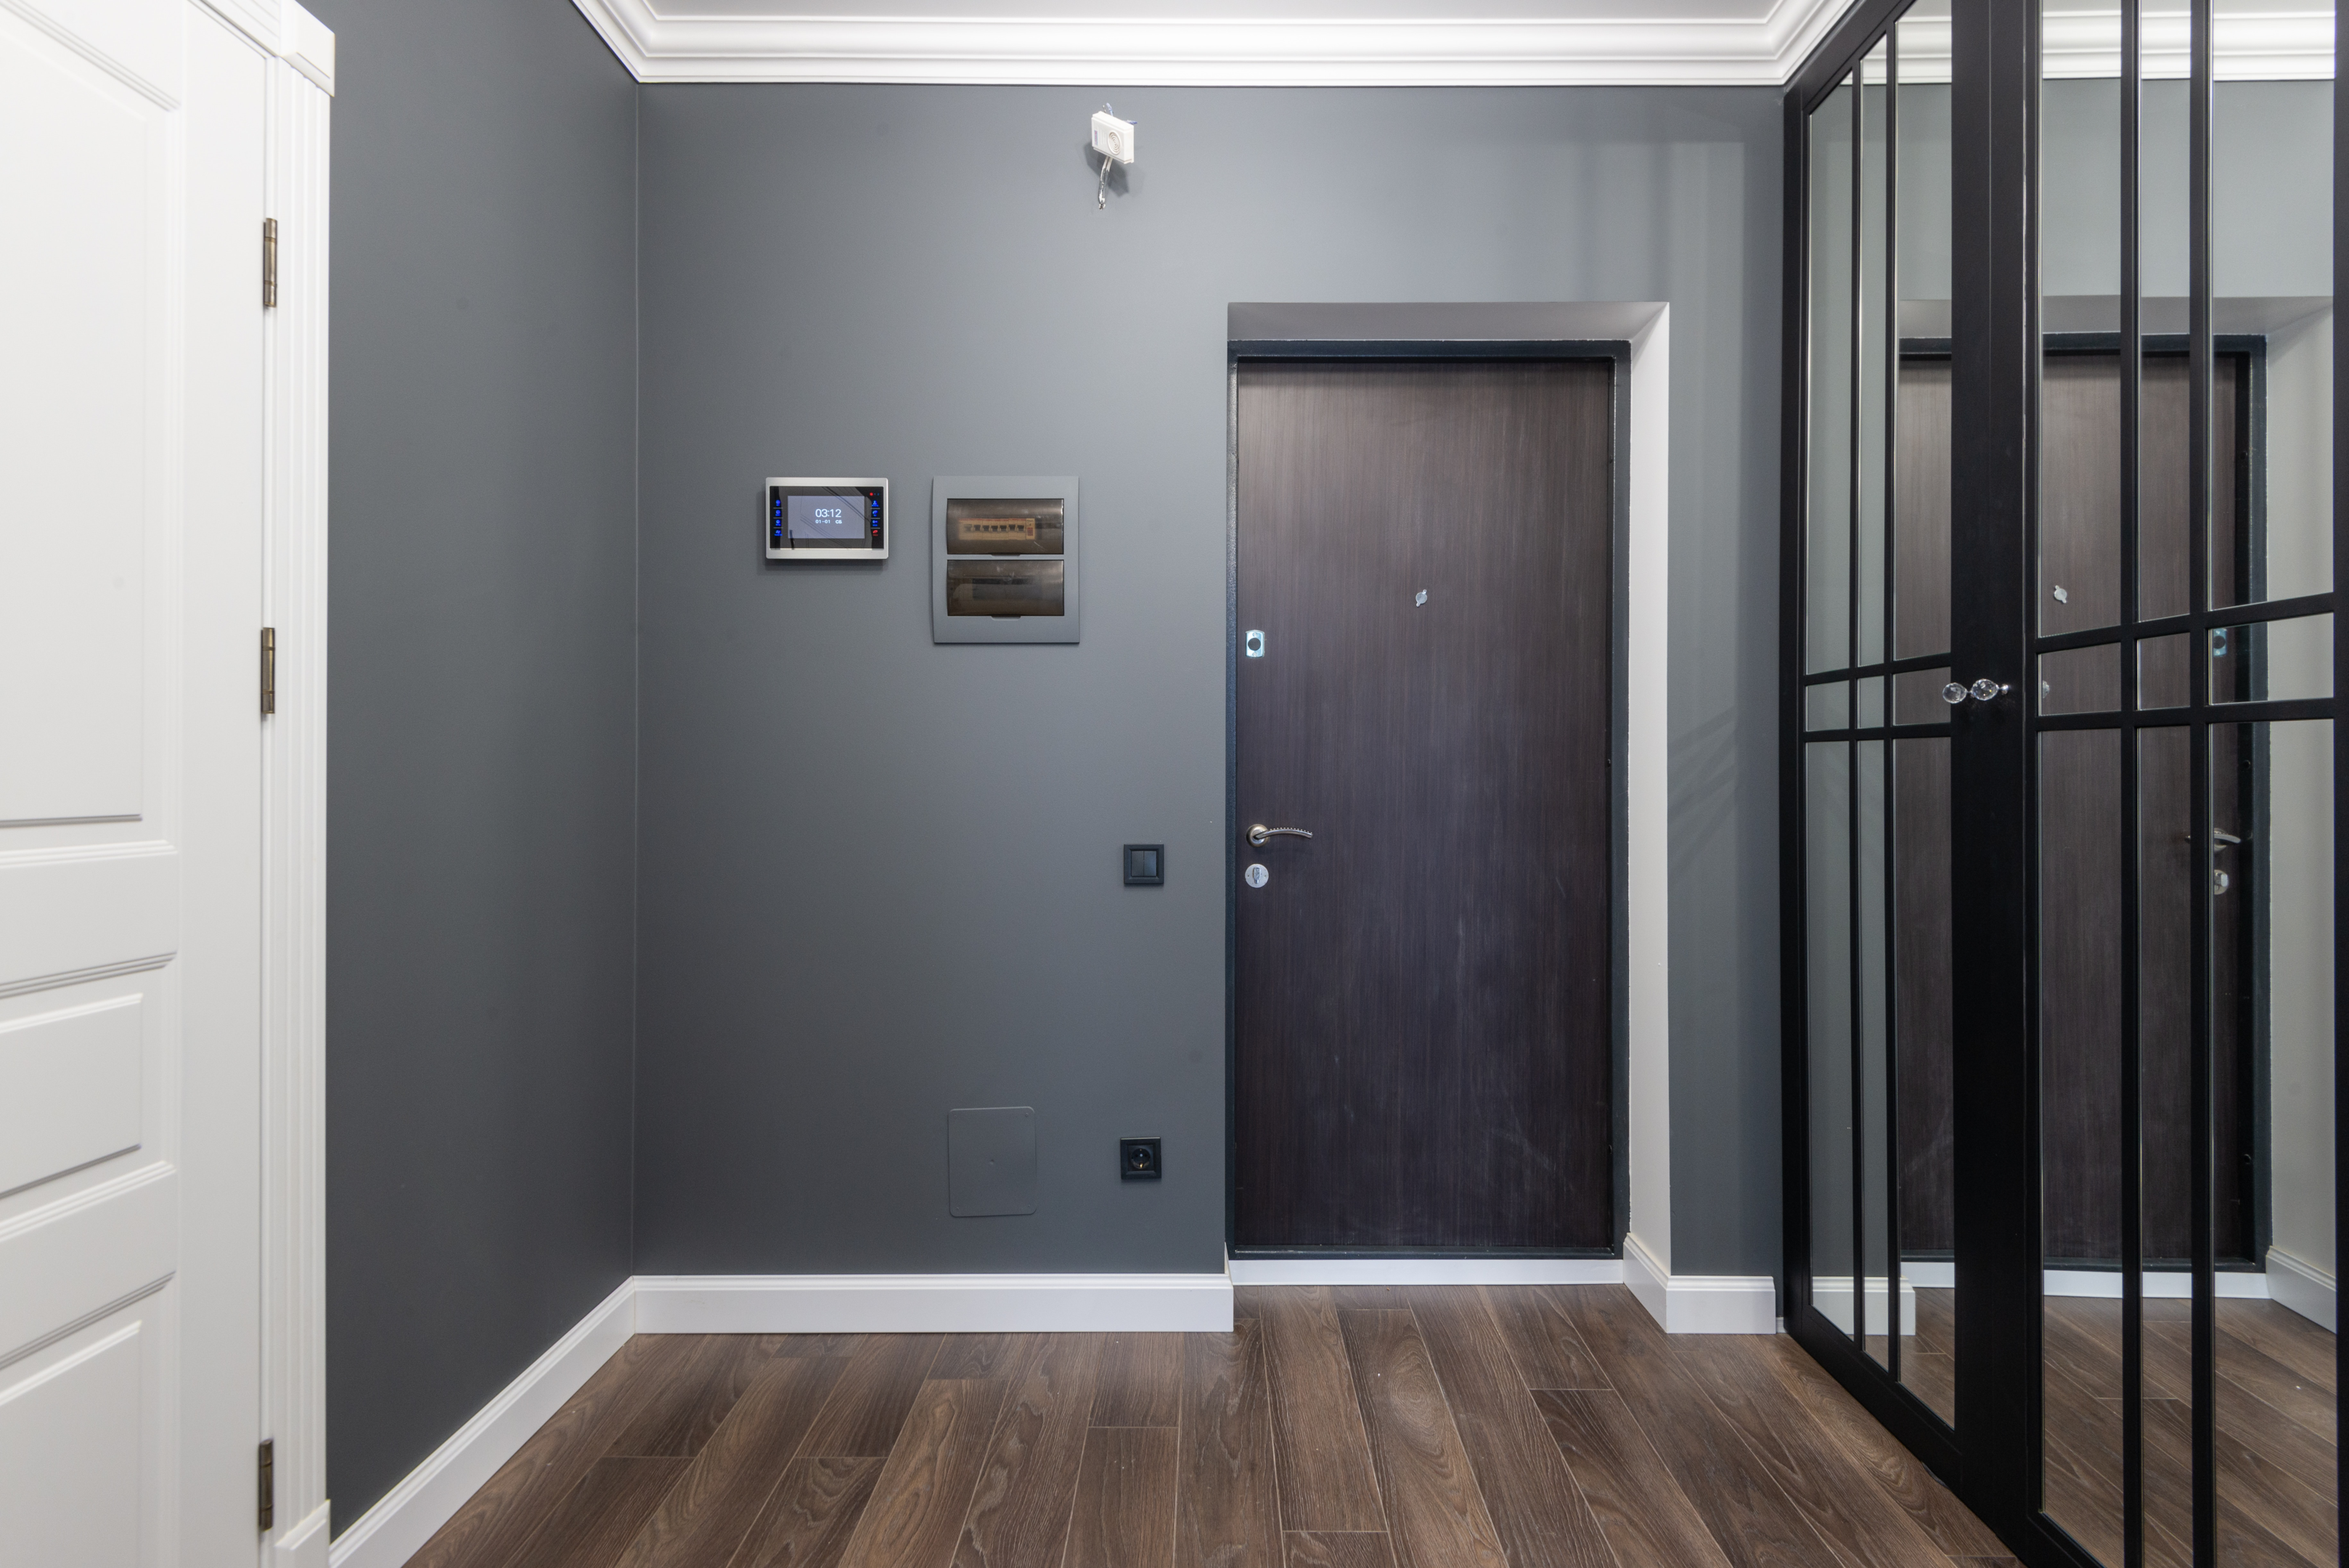 A modern apartment with a keyless access control system for entries and exits